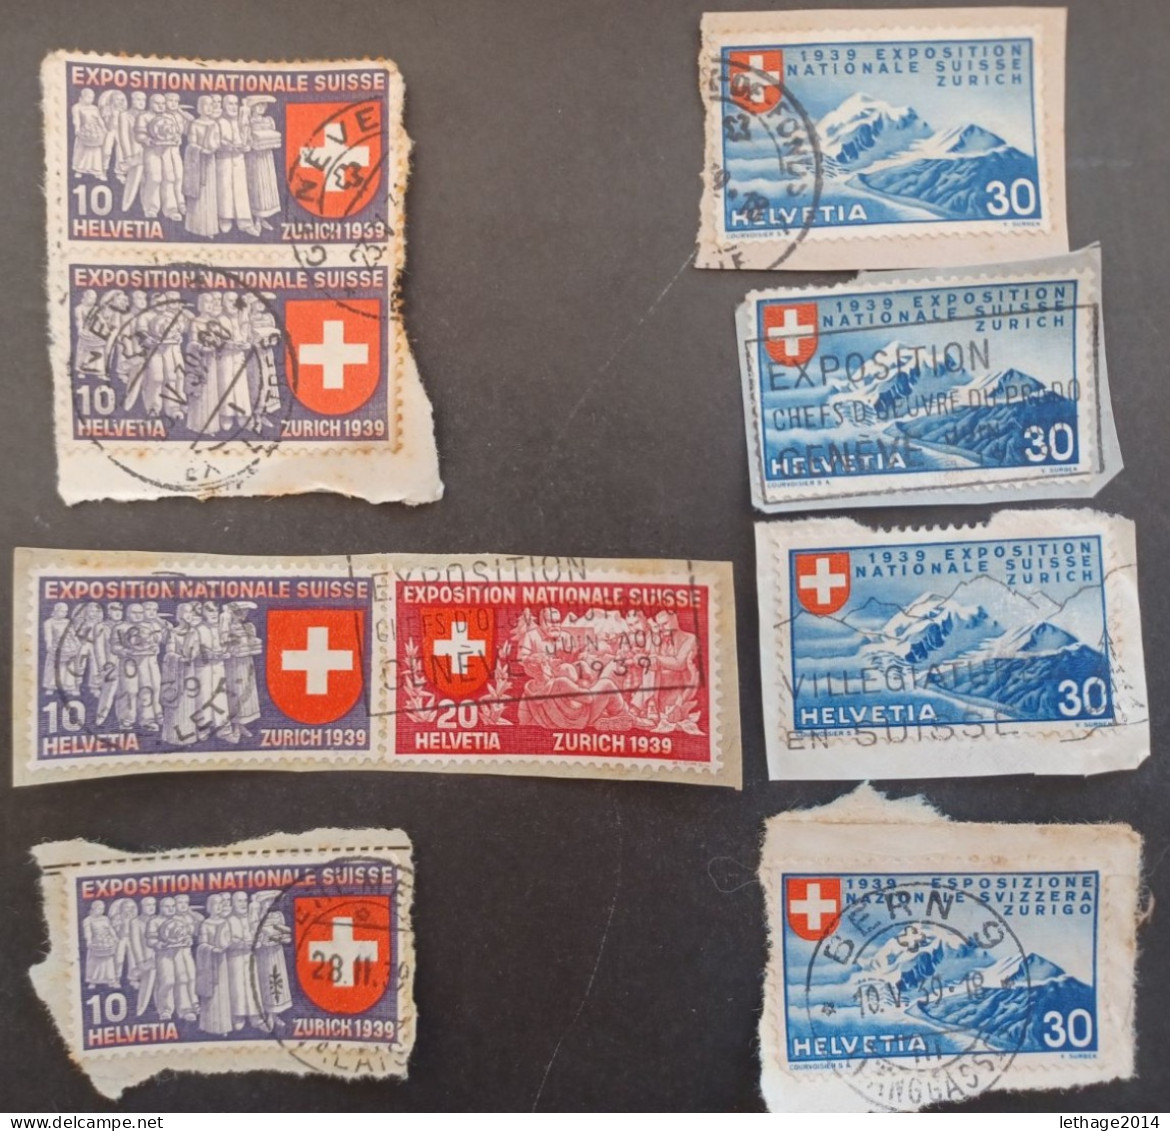 SVIZZERA SWITZERLAND FROM 1862 HELVETIA TO 1960 BIG STOCK MIX SERVICE AIRMAIL PRO JUVENTUE FRAGMANT 90 SCANNERS -- GIULY